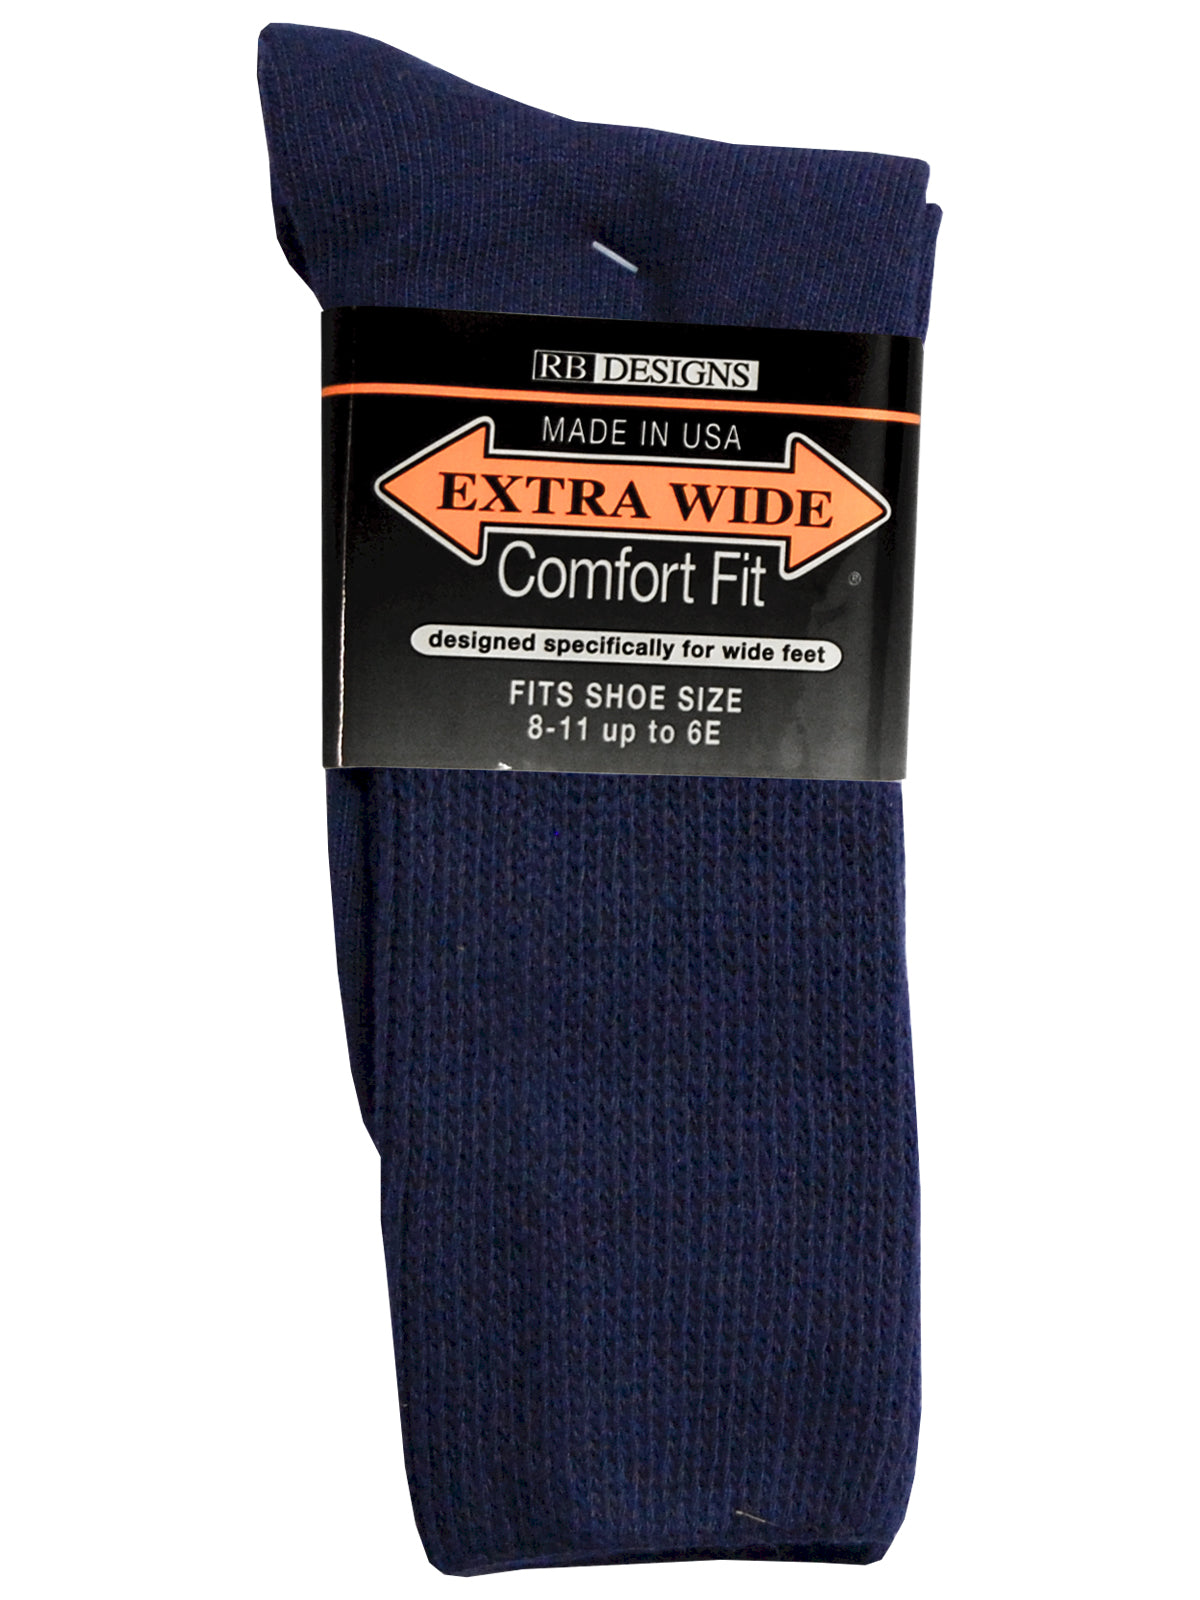 Extra Wide Men's Comfort Fit Athletic Crew Socks in Navy - Size Large (12 - 16)